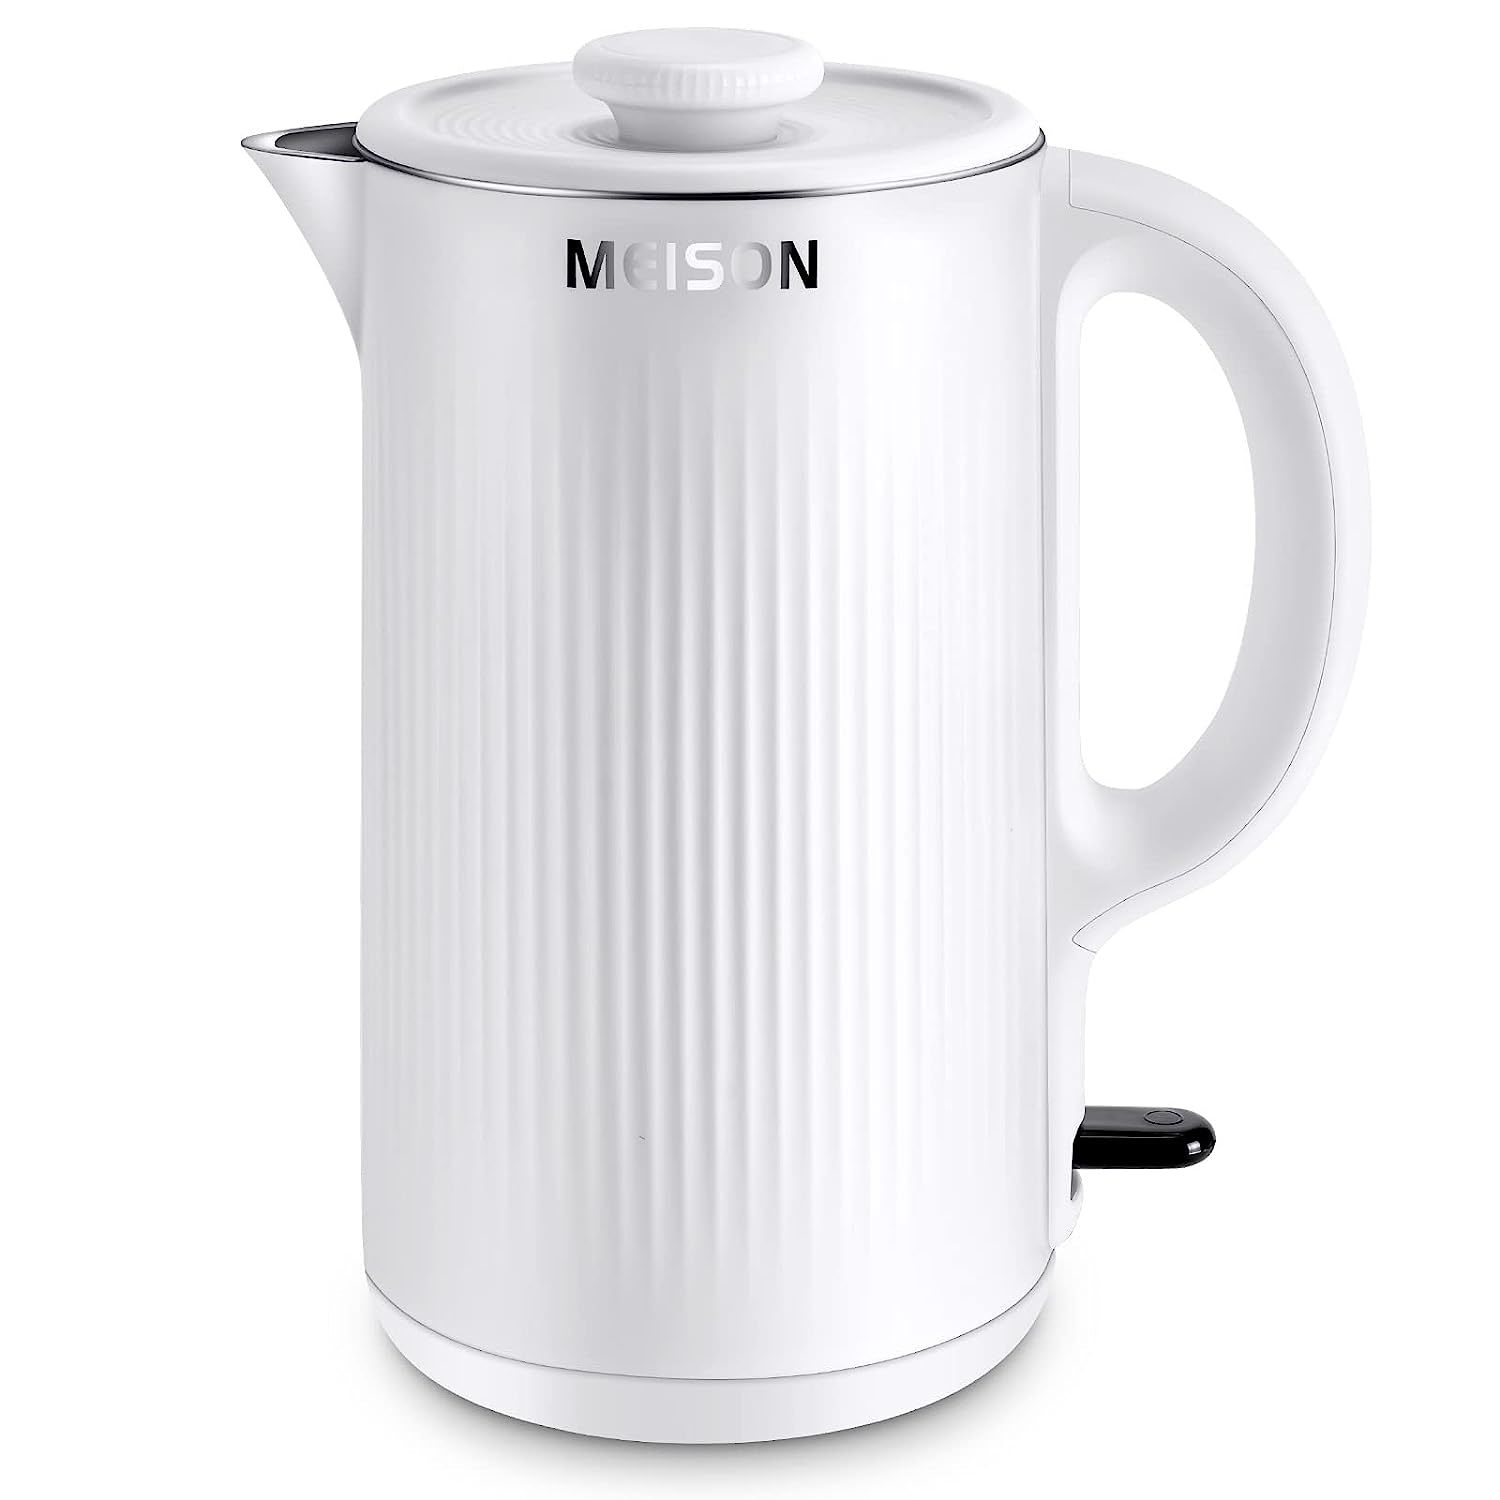 0.5L Small Electric Tea Kettle, Double Wall Hot Water Boiler